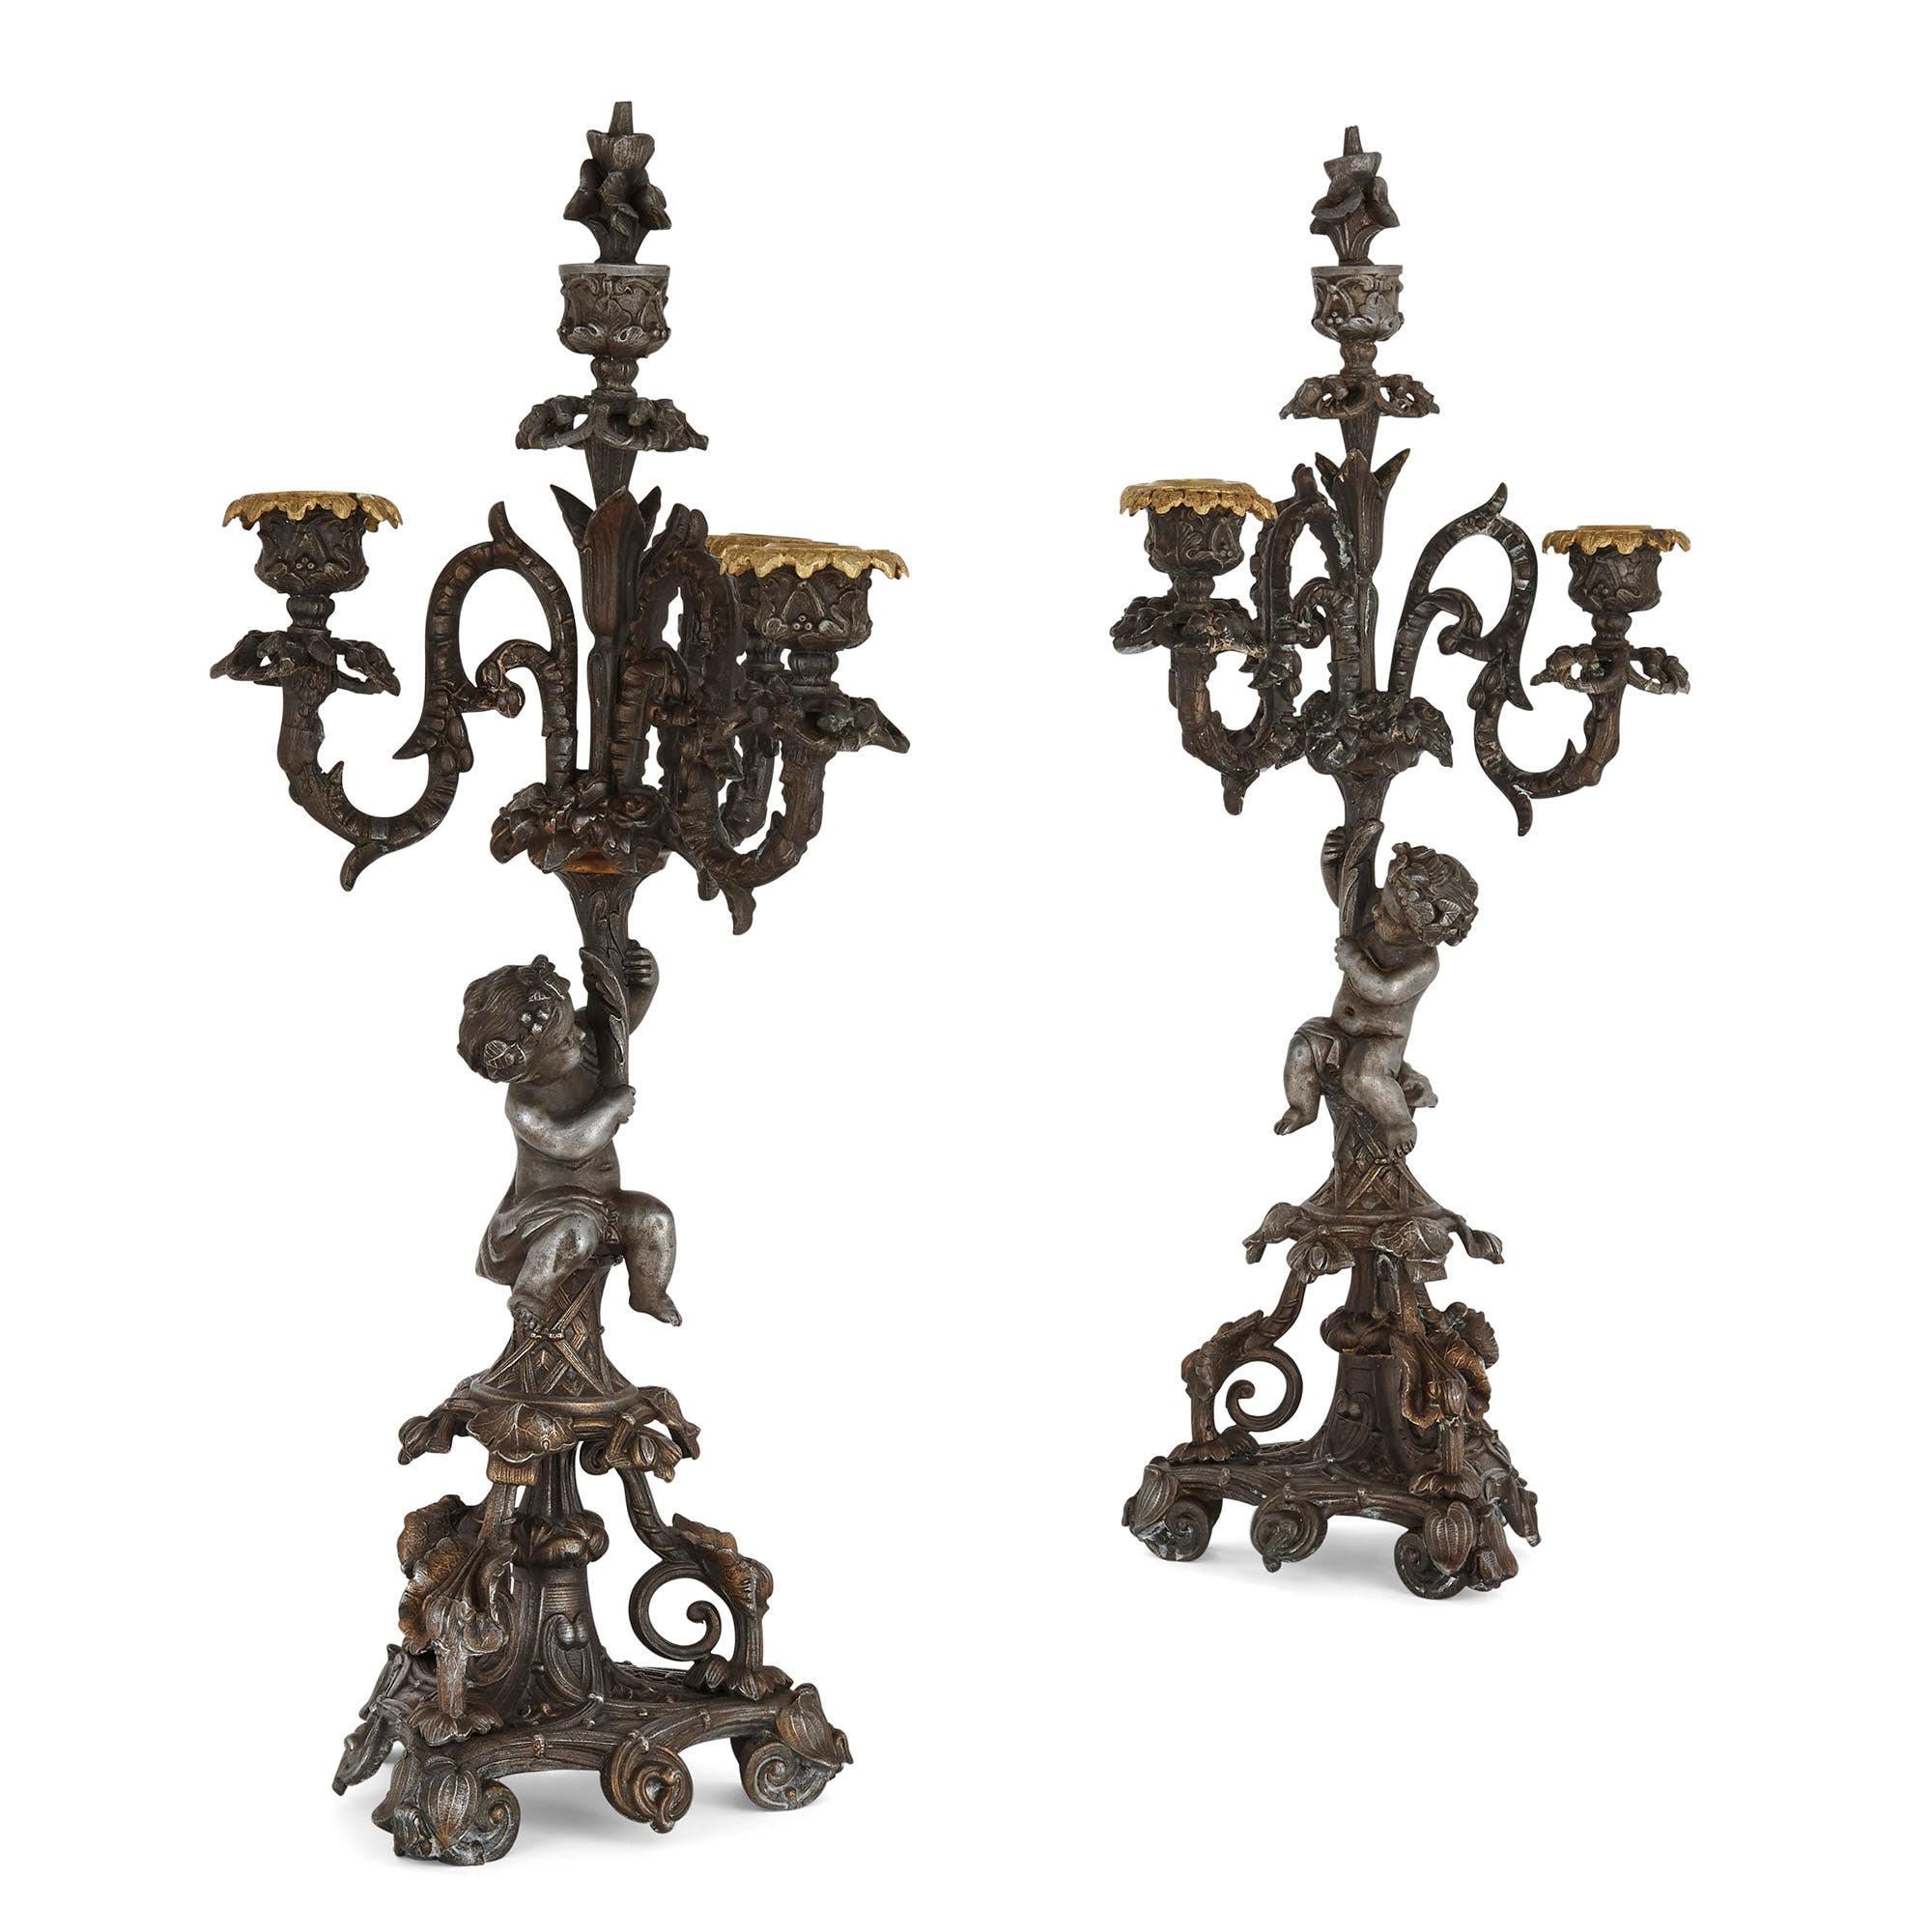 Pair of Second Empire period candelabra
French, circa 1860
Measures: Height 52cm, width 23cm, depth 16cm

Each candelabrum in this pair, wrought in the charming Second Empire style from patinated metal, features a central shaped column raised